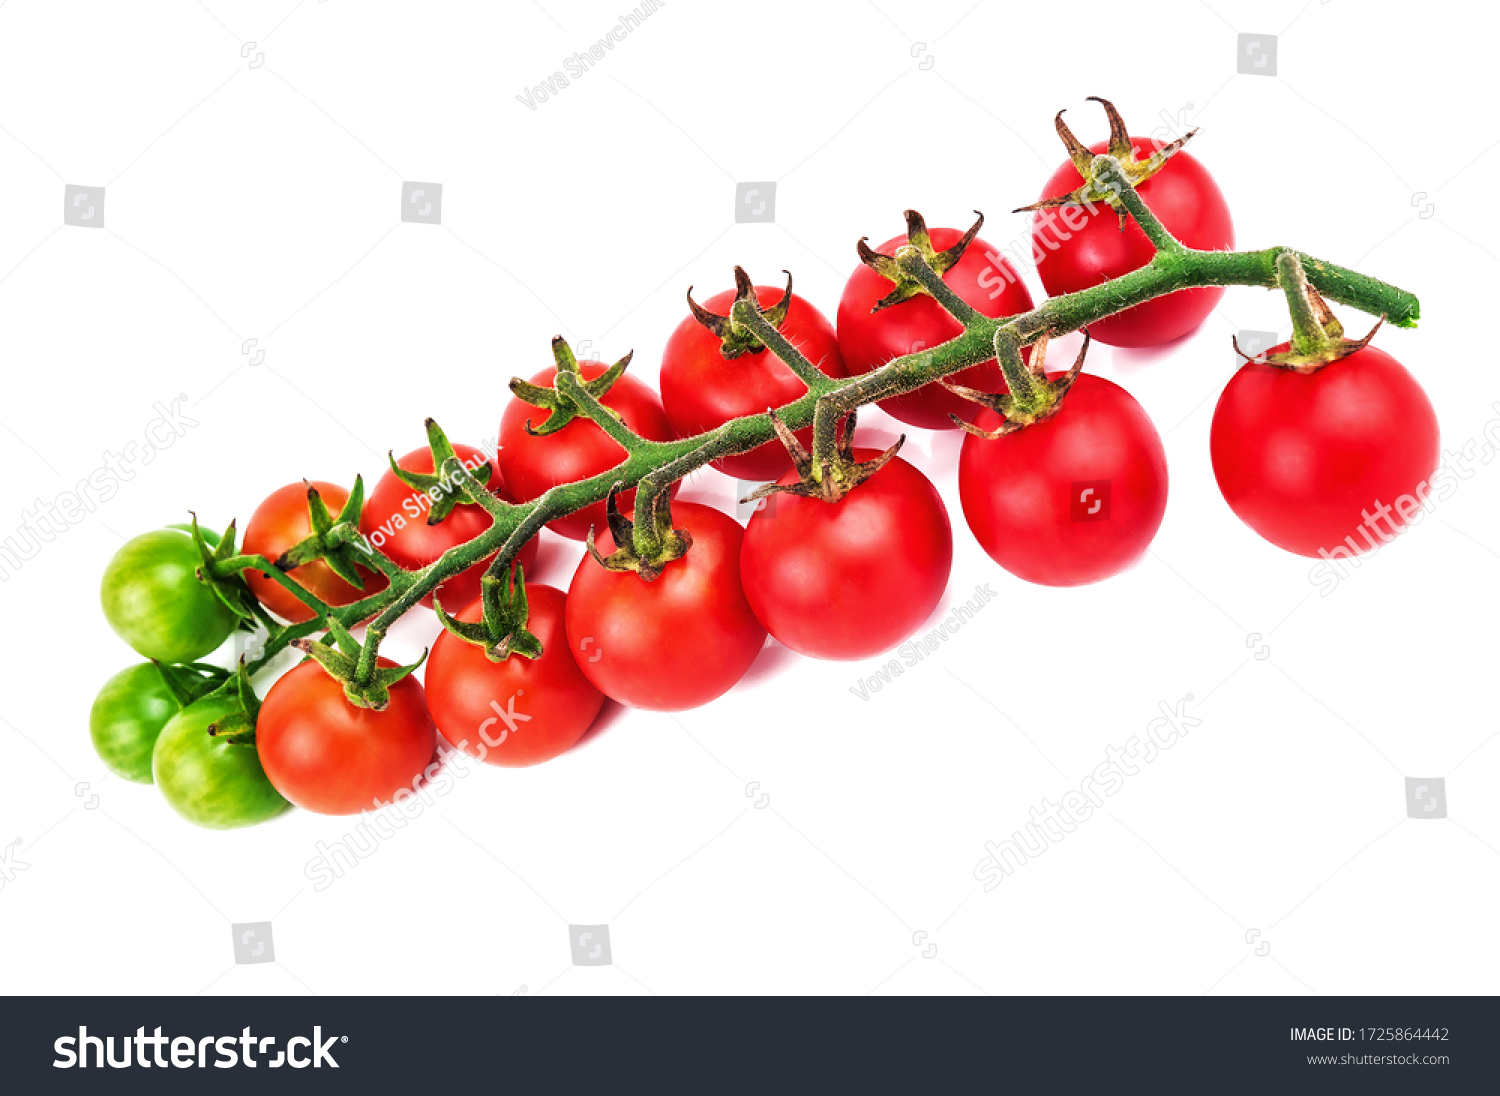 lush and ripe cherry tomato twig isolated on white #1725864442